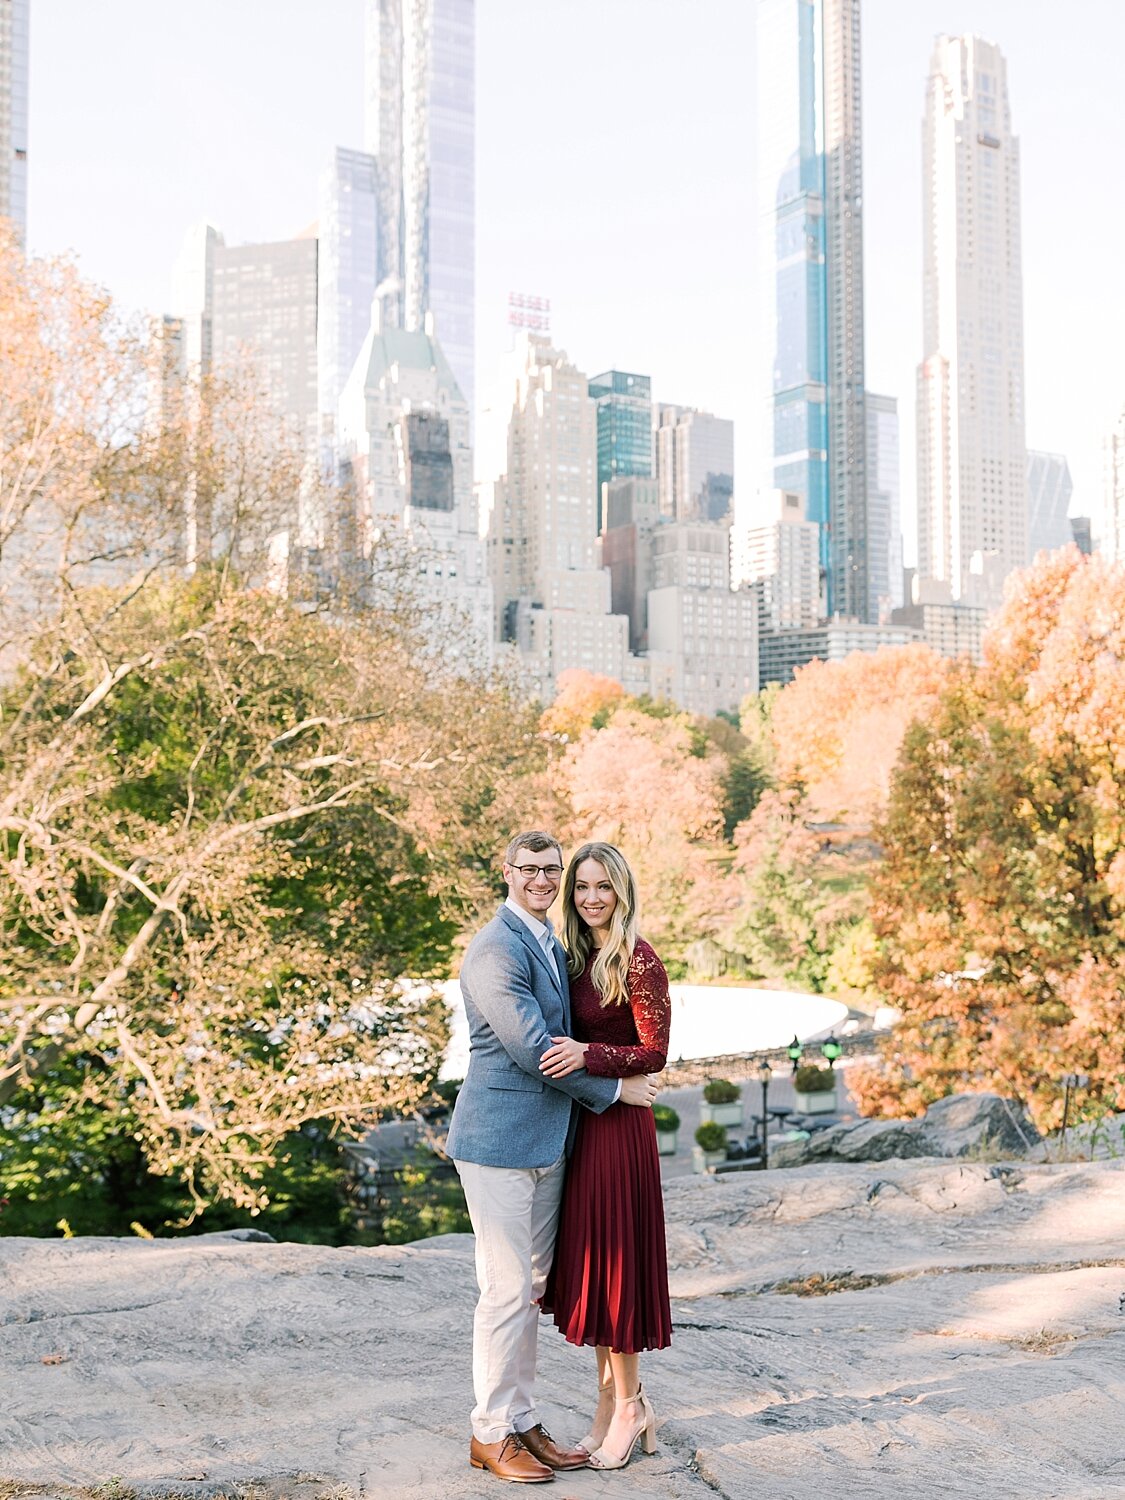 New York City engagement photos by Asher Gardner Photography